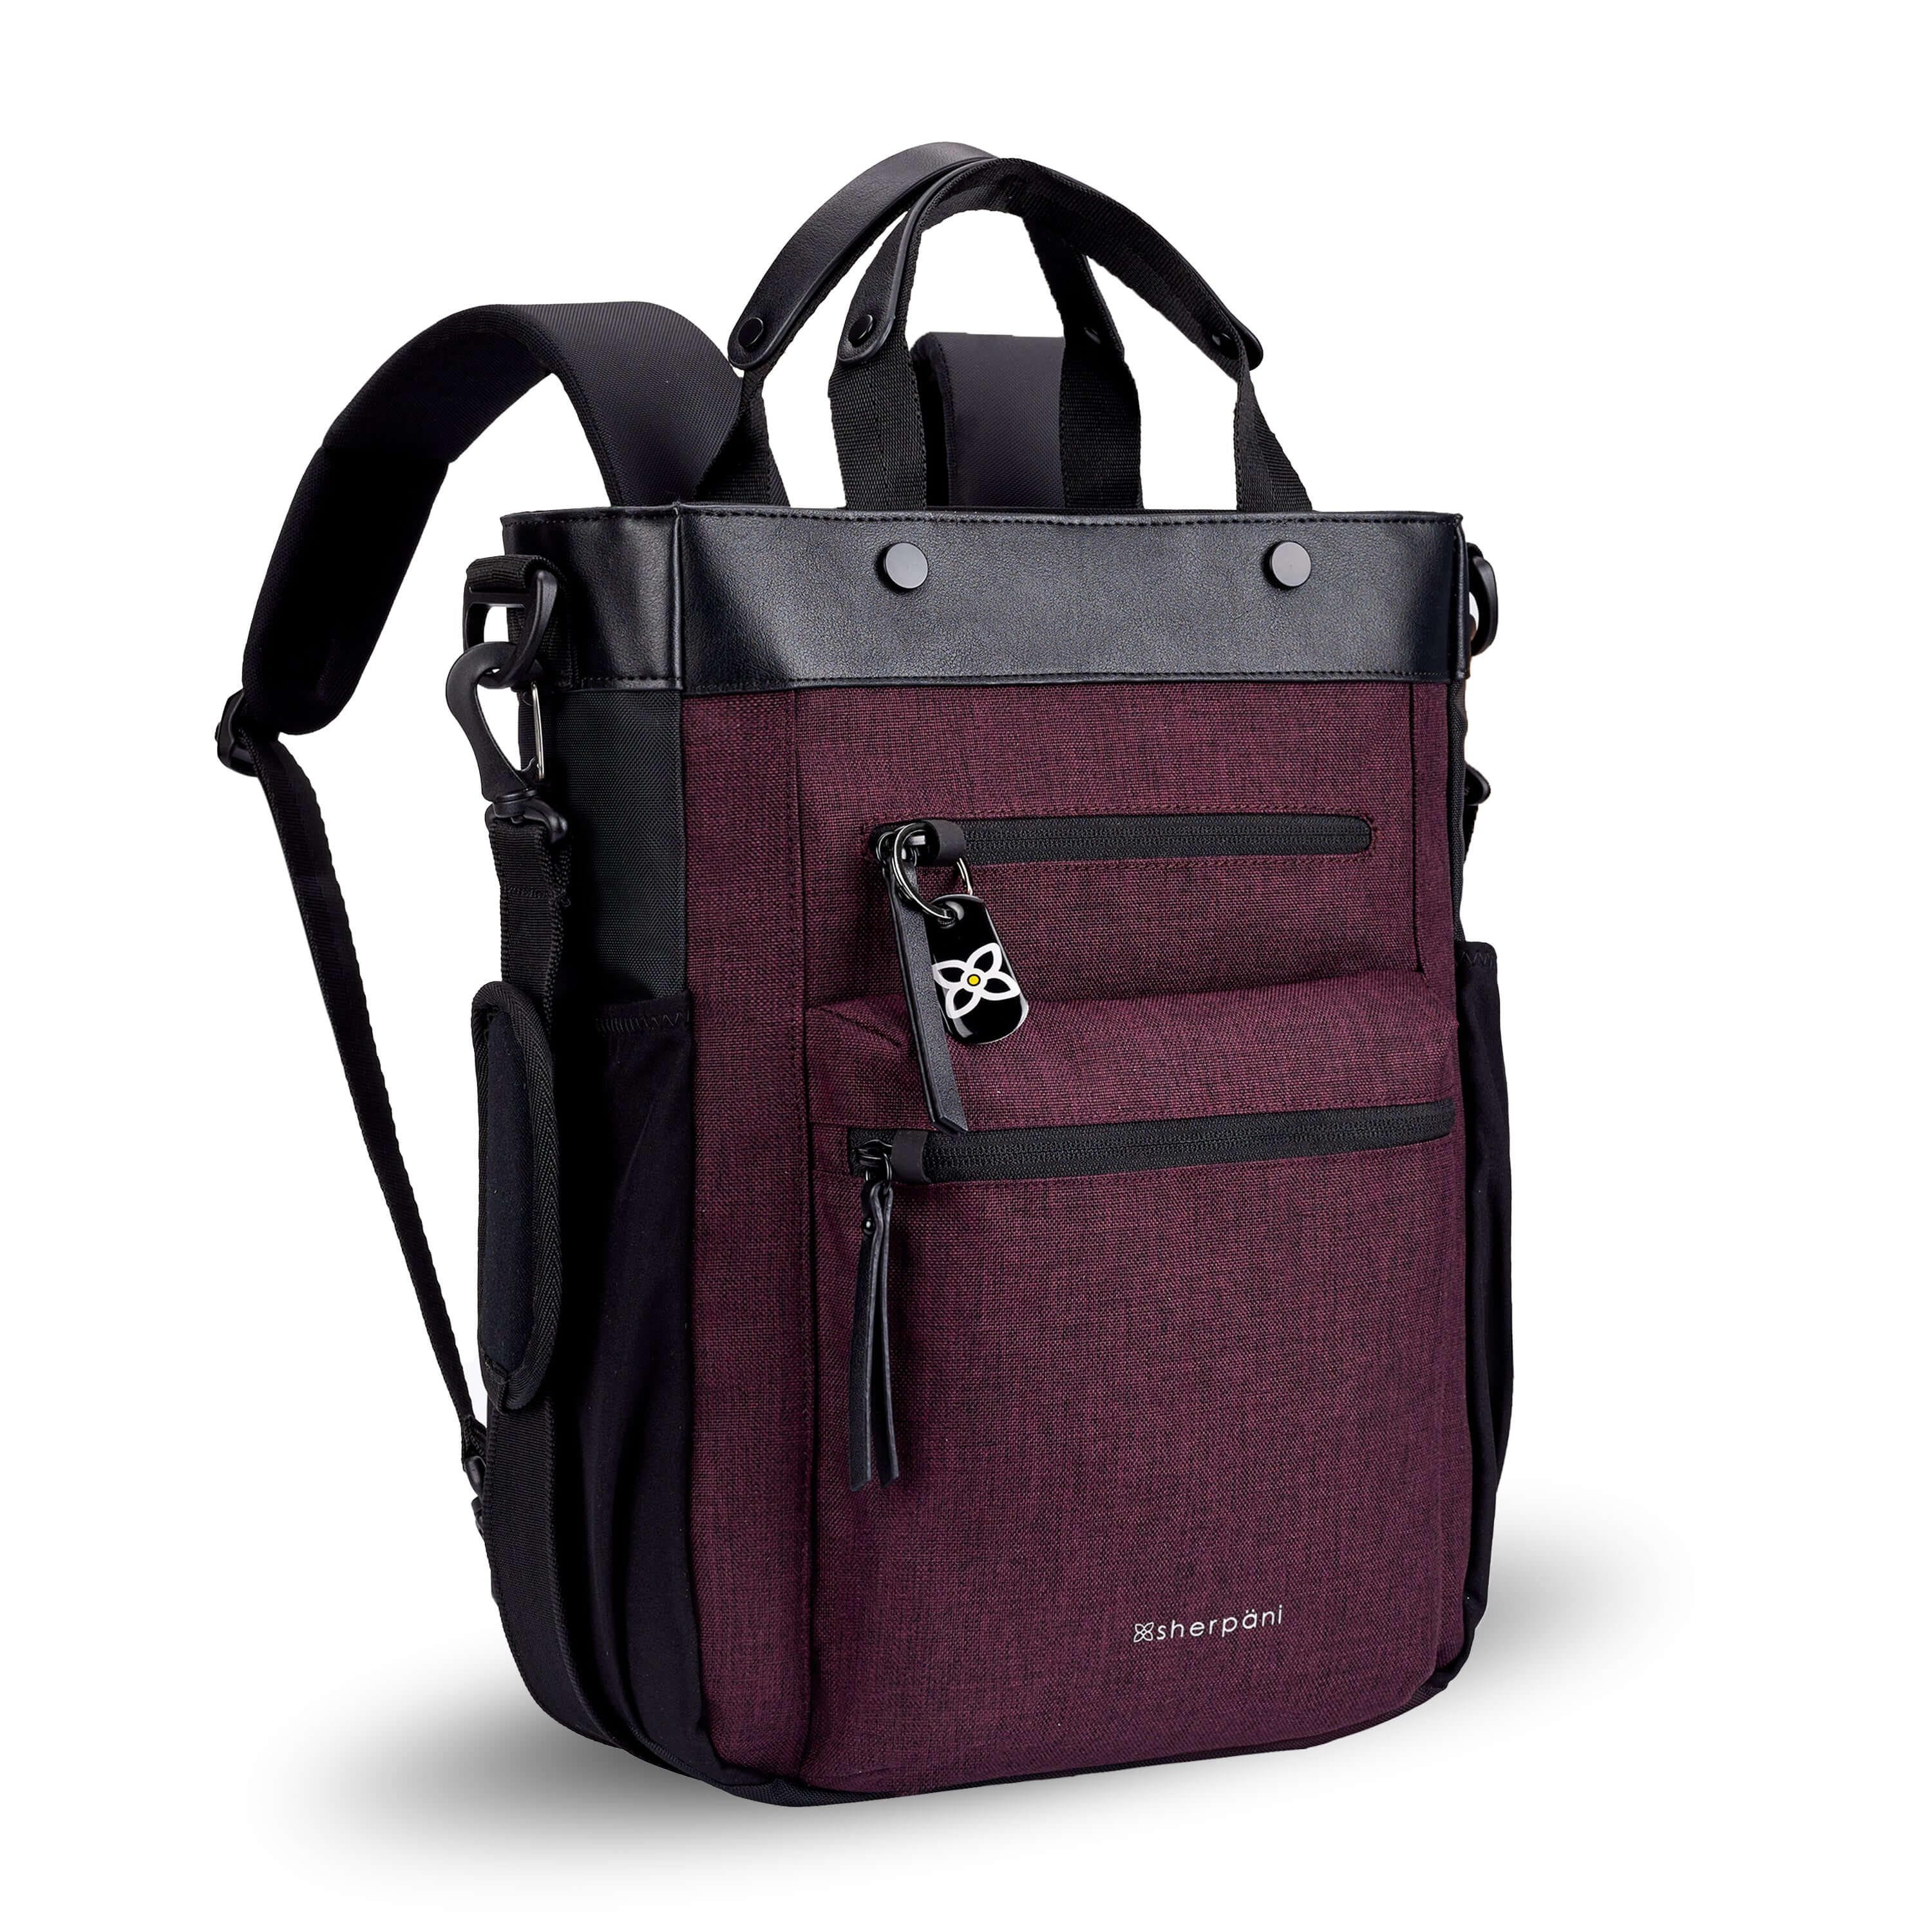 Angled front view of Sherpani&#39;s Anti-Theft bag, the Soleil AT in Merlot, with vegan leather accents in black. On the front are two locking zipper compartments, a ReturnMe tag is clipped to the upper one. Two elastic water bottle holders sit on either side of the bag. It has padded backpack straps, short tote handles, and an adjustable/detachable crossbody strap.